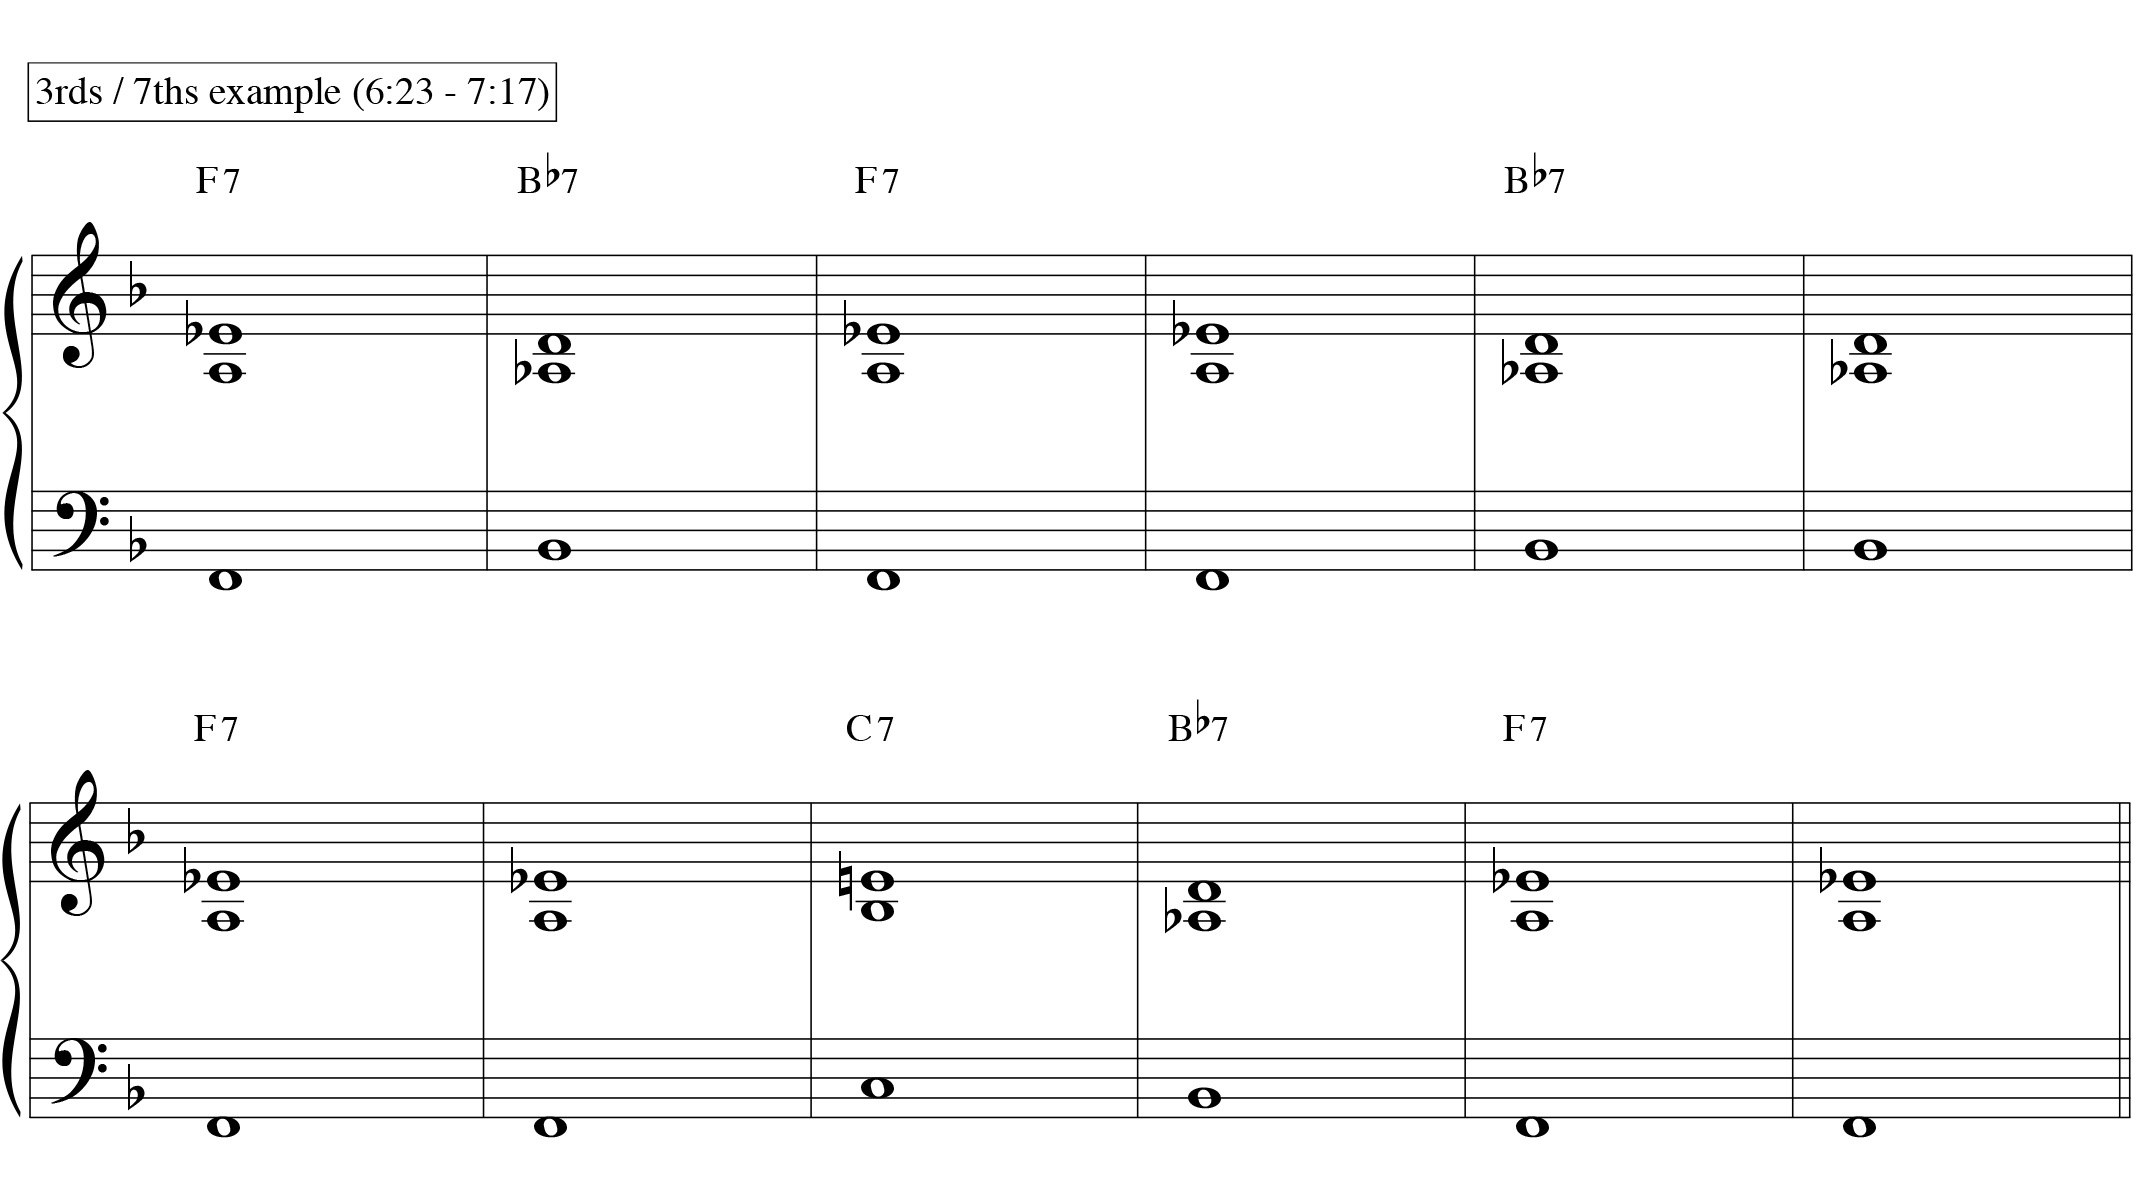 12 bar blues in F with 3-note voicings